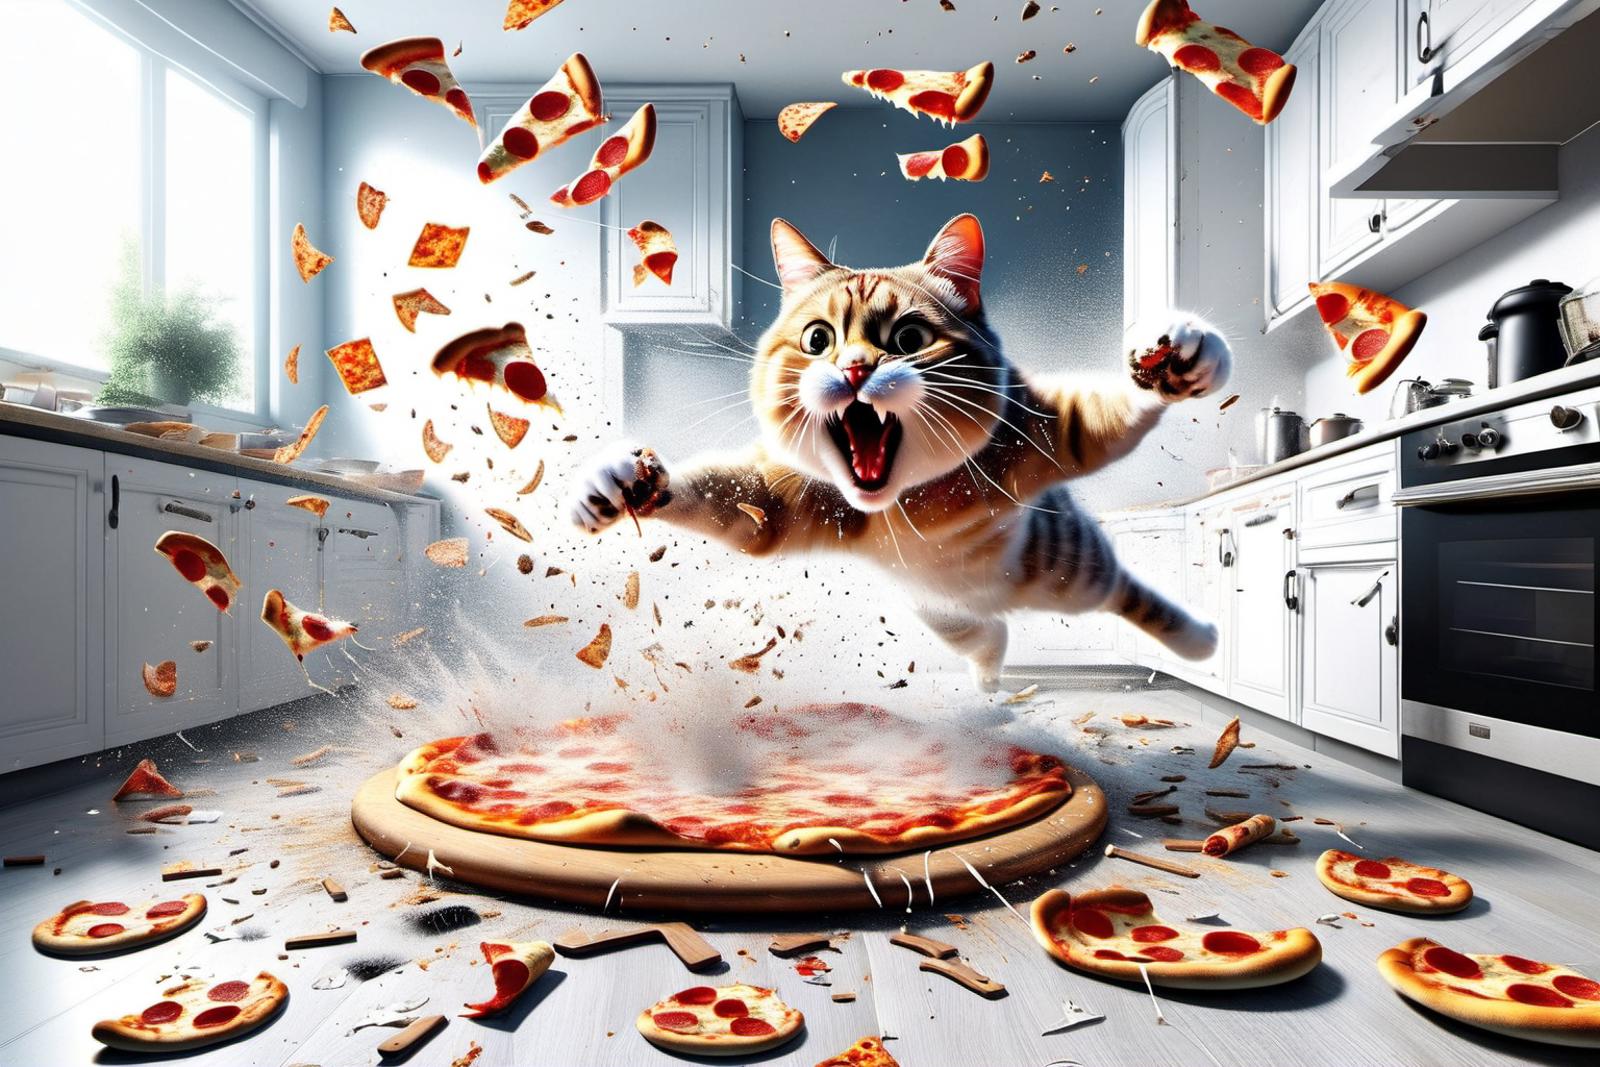 A cartoon cat is jumping in the air while eating pizza and breaking it into pieces.